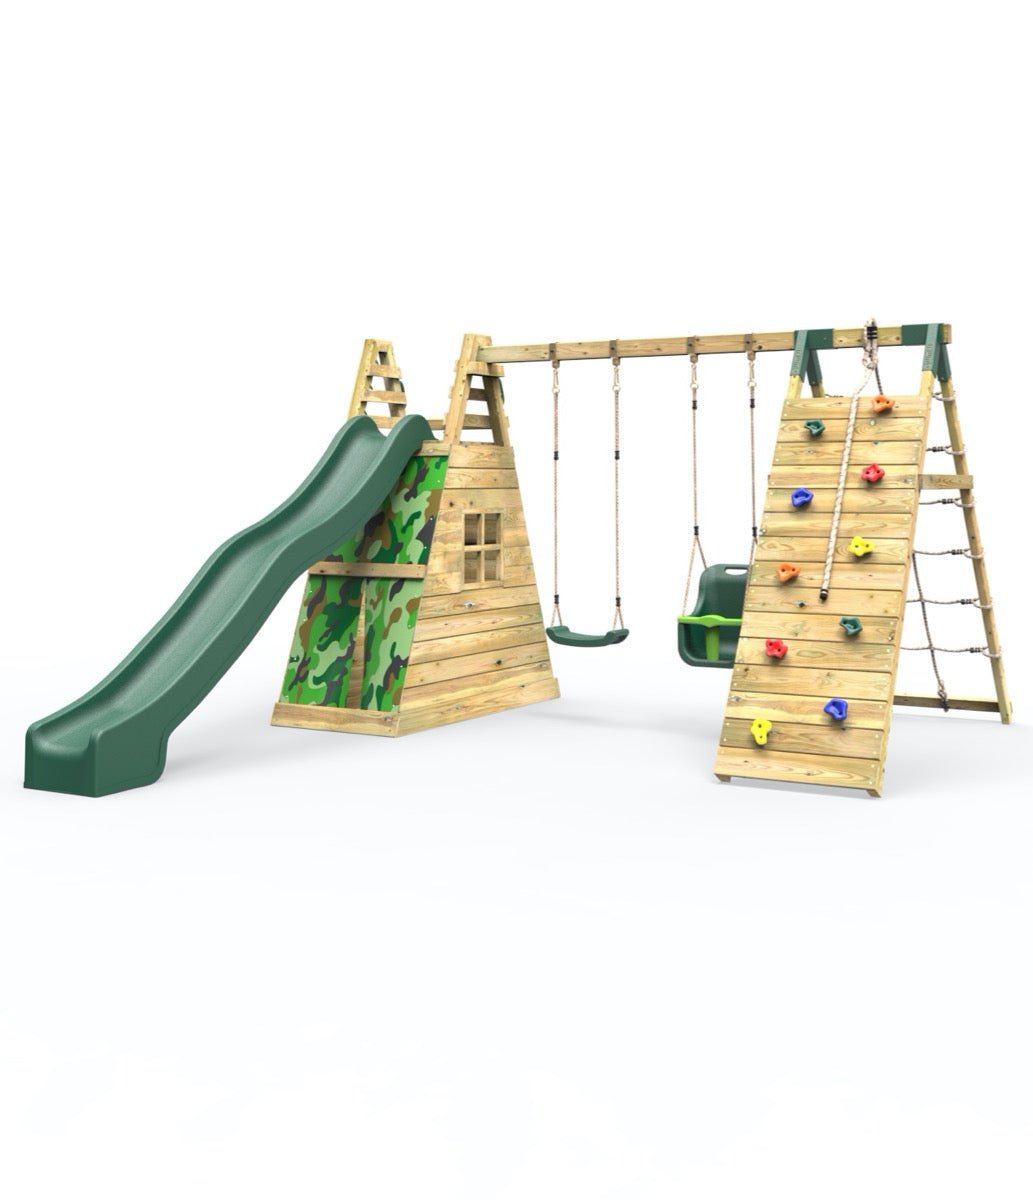 Rebo Wooden Pyramid Climbing Frame with Swings & 10ft Water Slide - Pixley